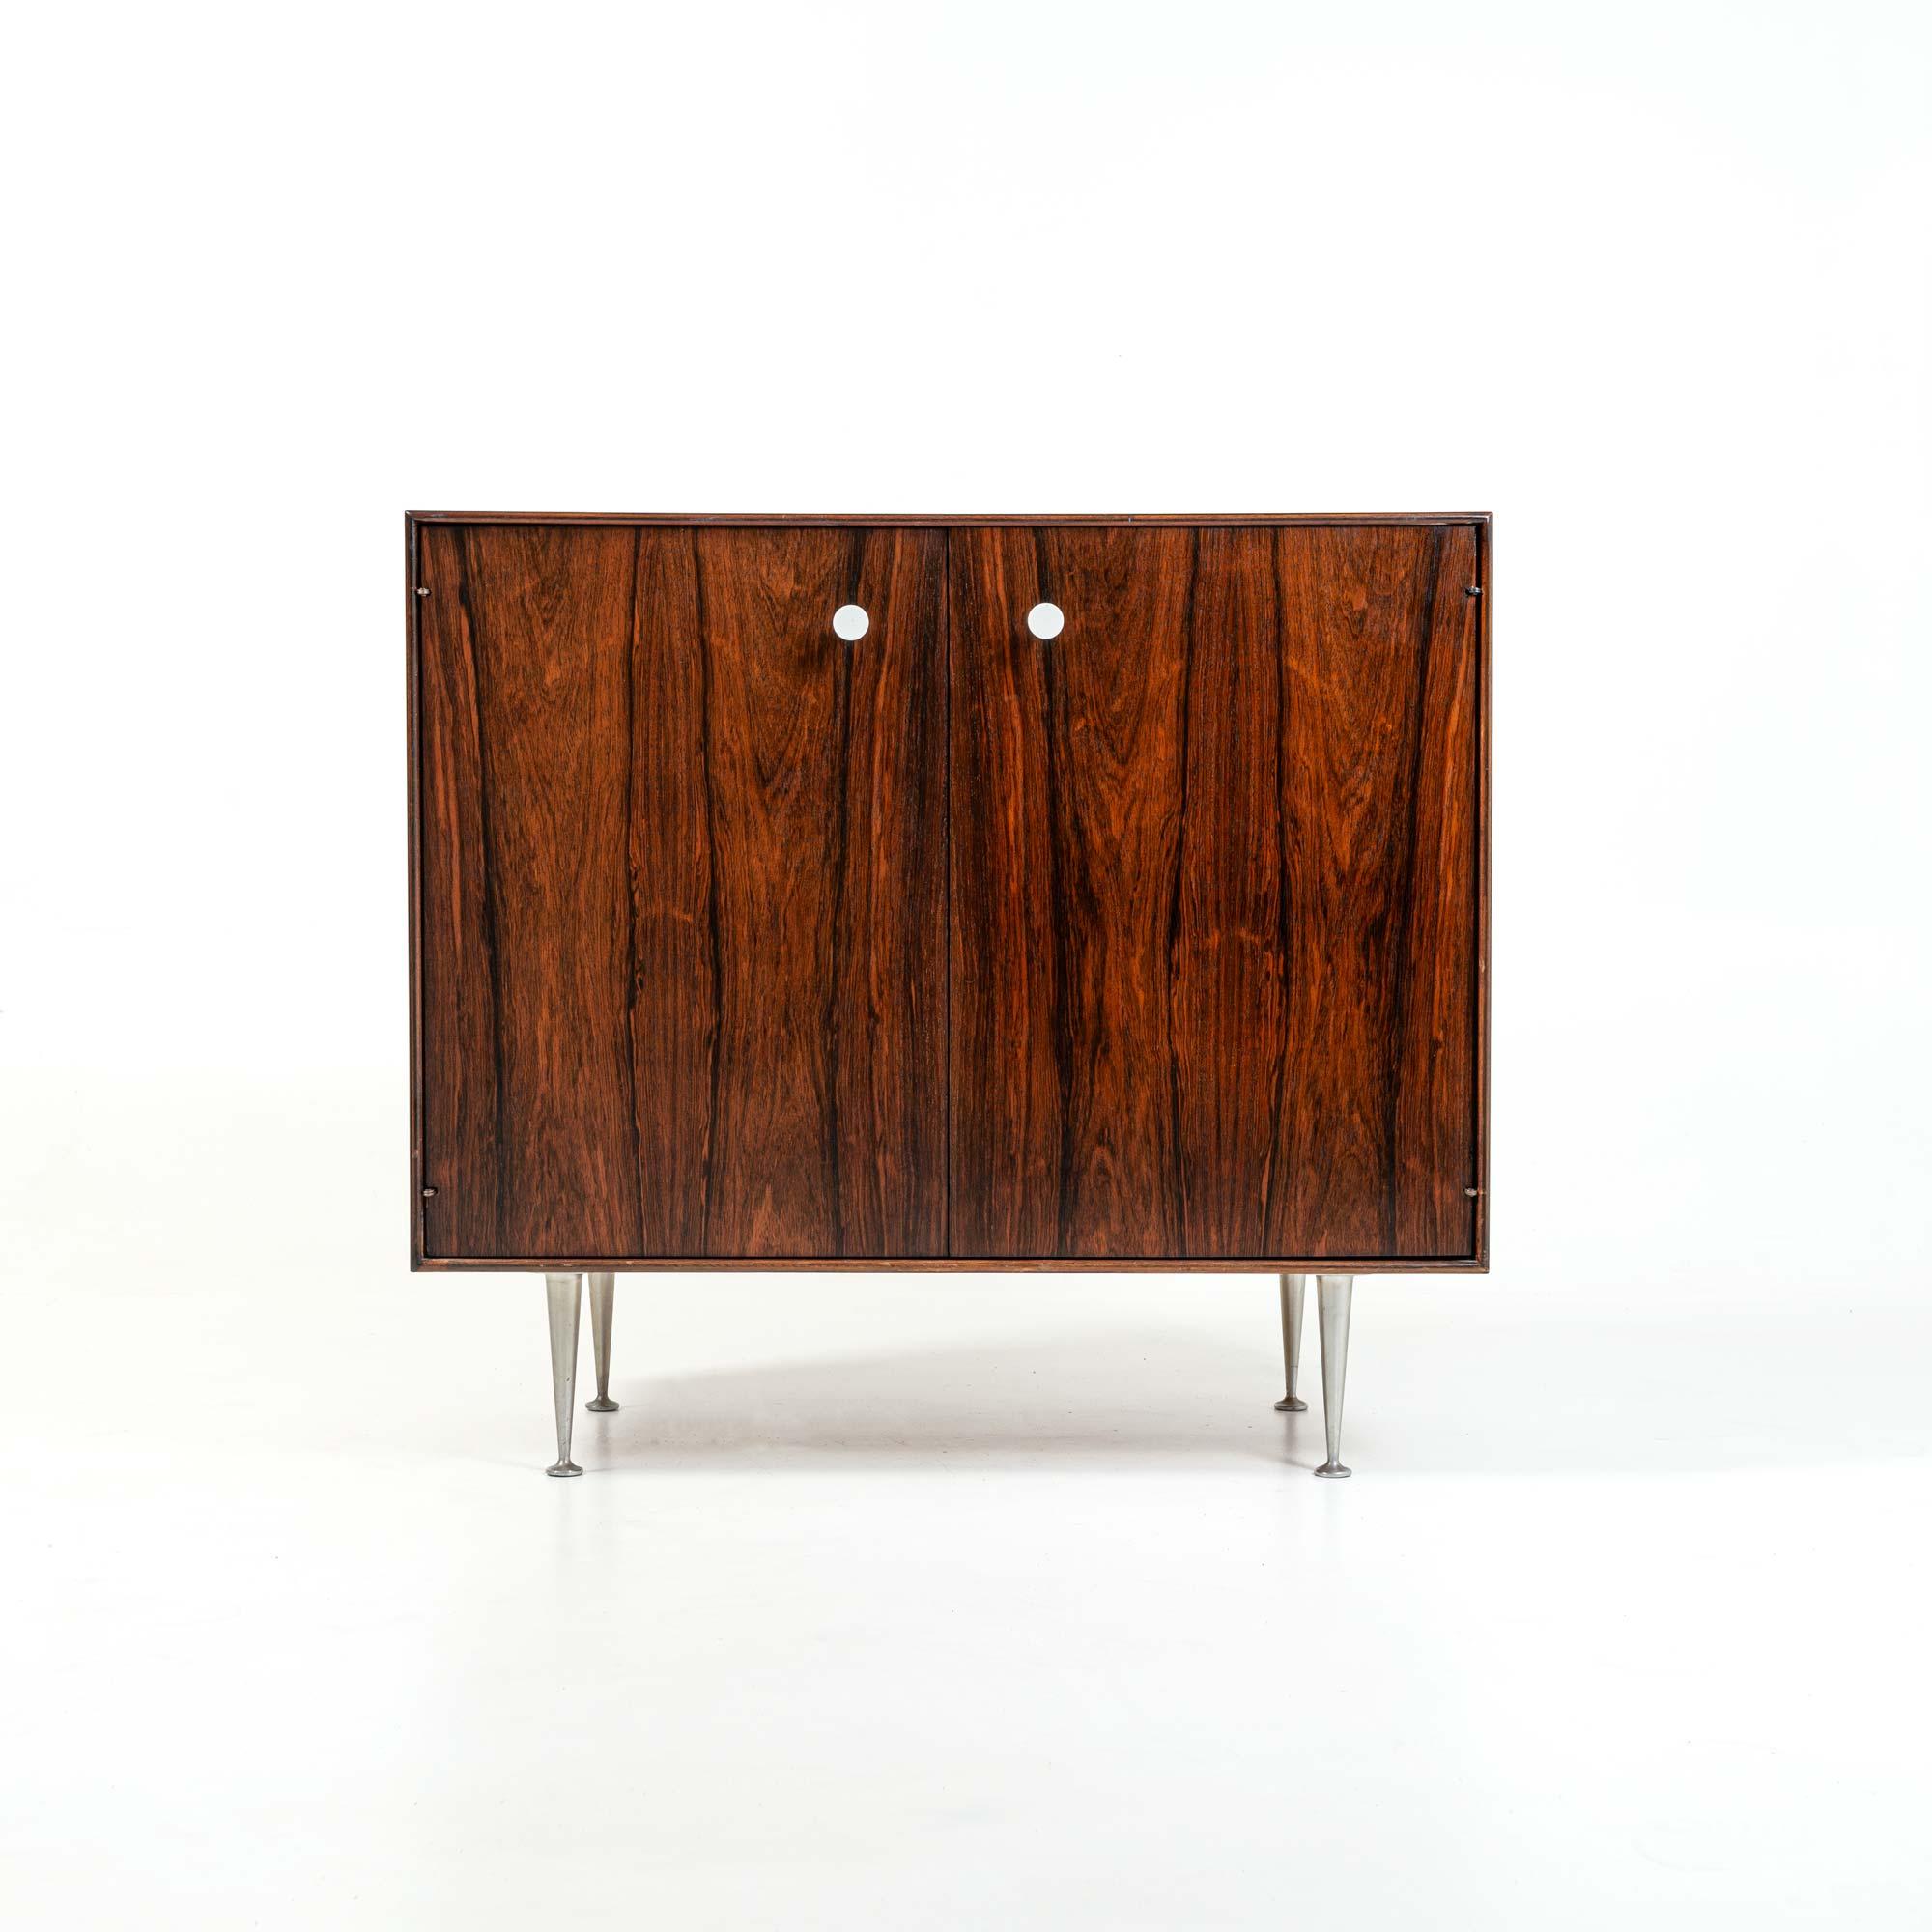 An two door designed by George Nelson for Herman Miller, in Brazilian rosewood with its original white porcelain pulls and classic Thin Edge aluminum legs. The cabinet has one inner adjustable shelf. The doors have great graining inside and outside.